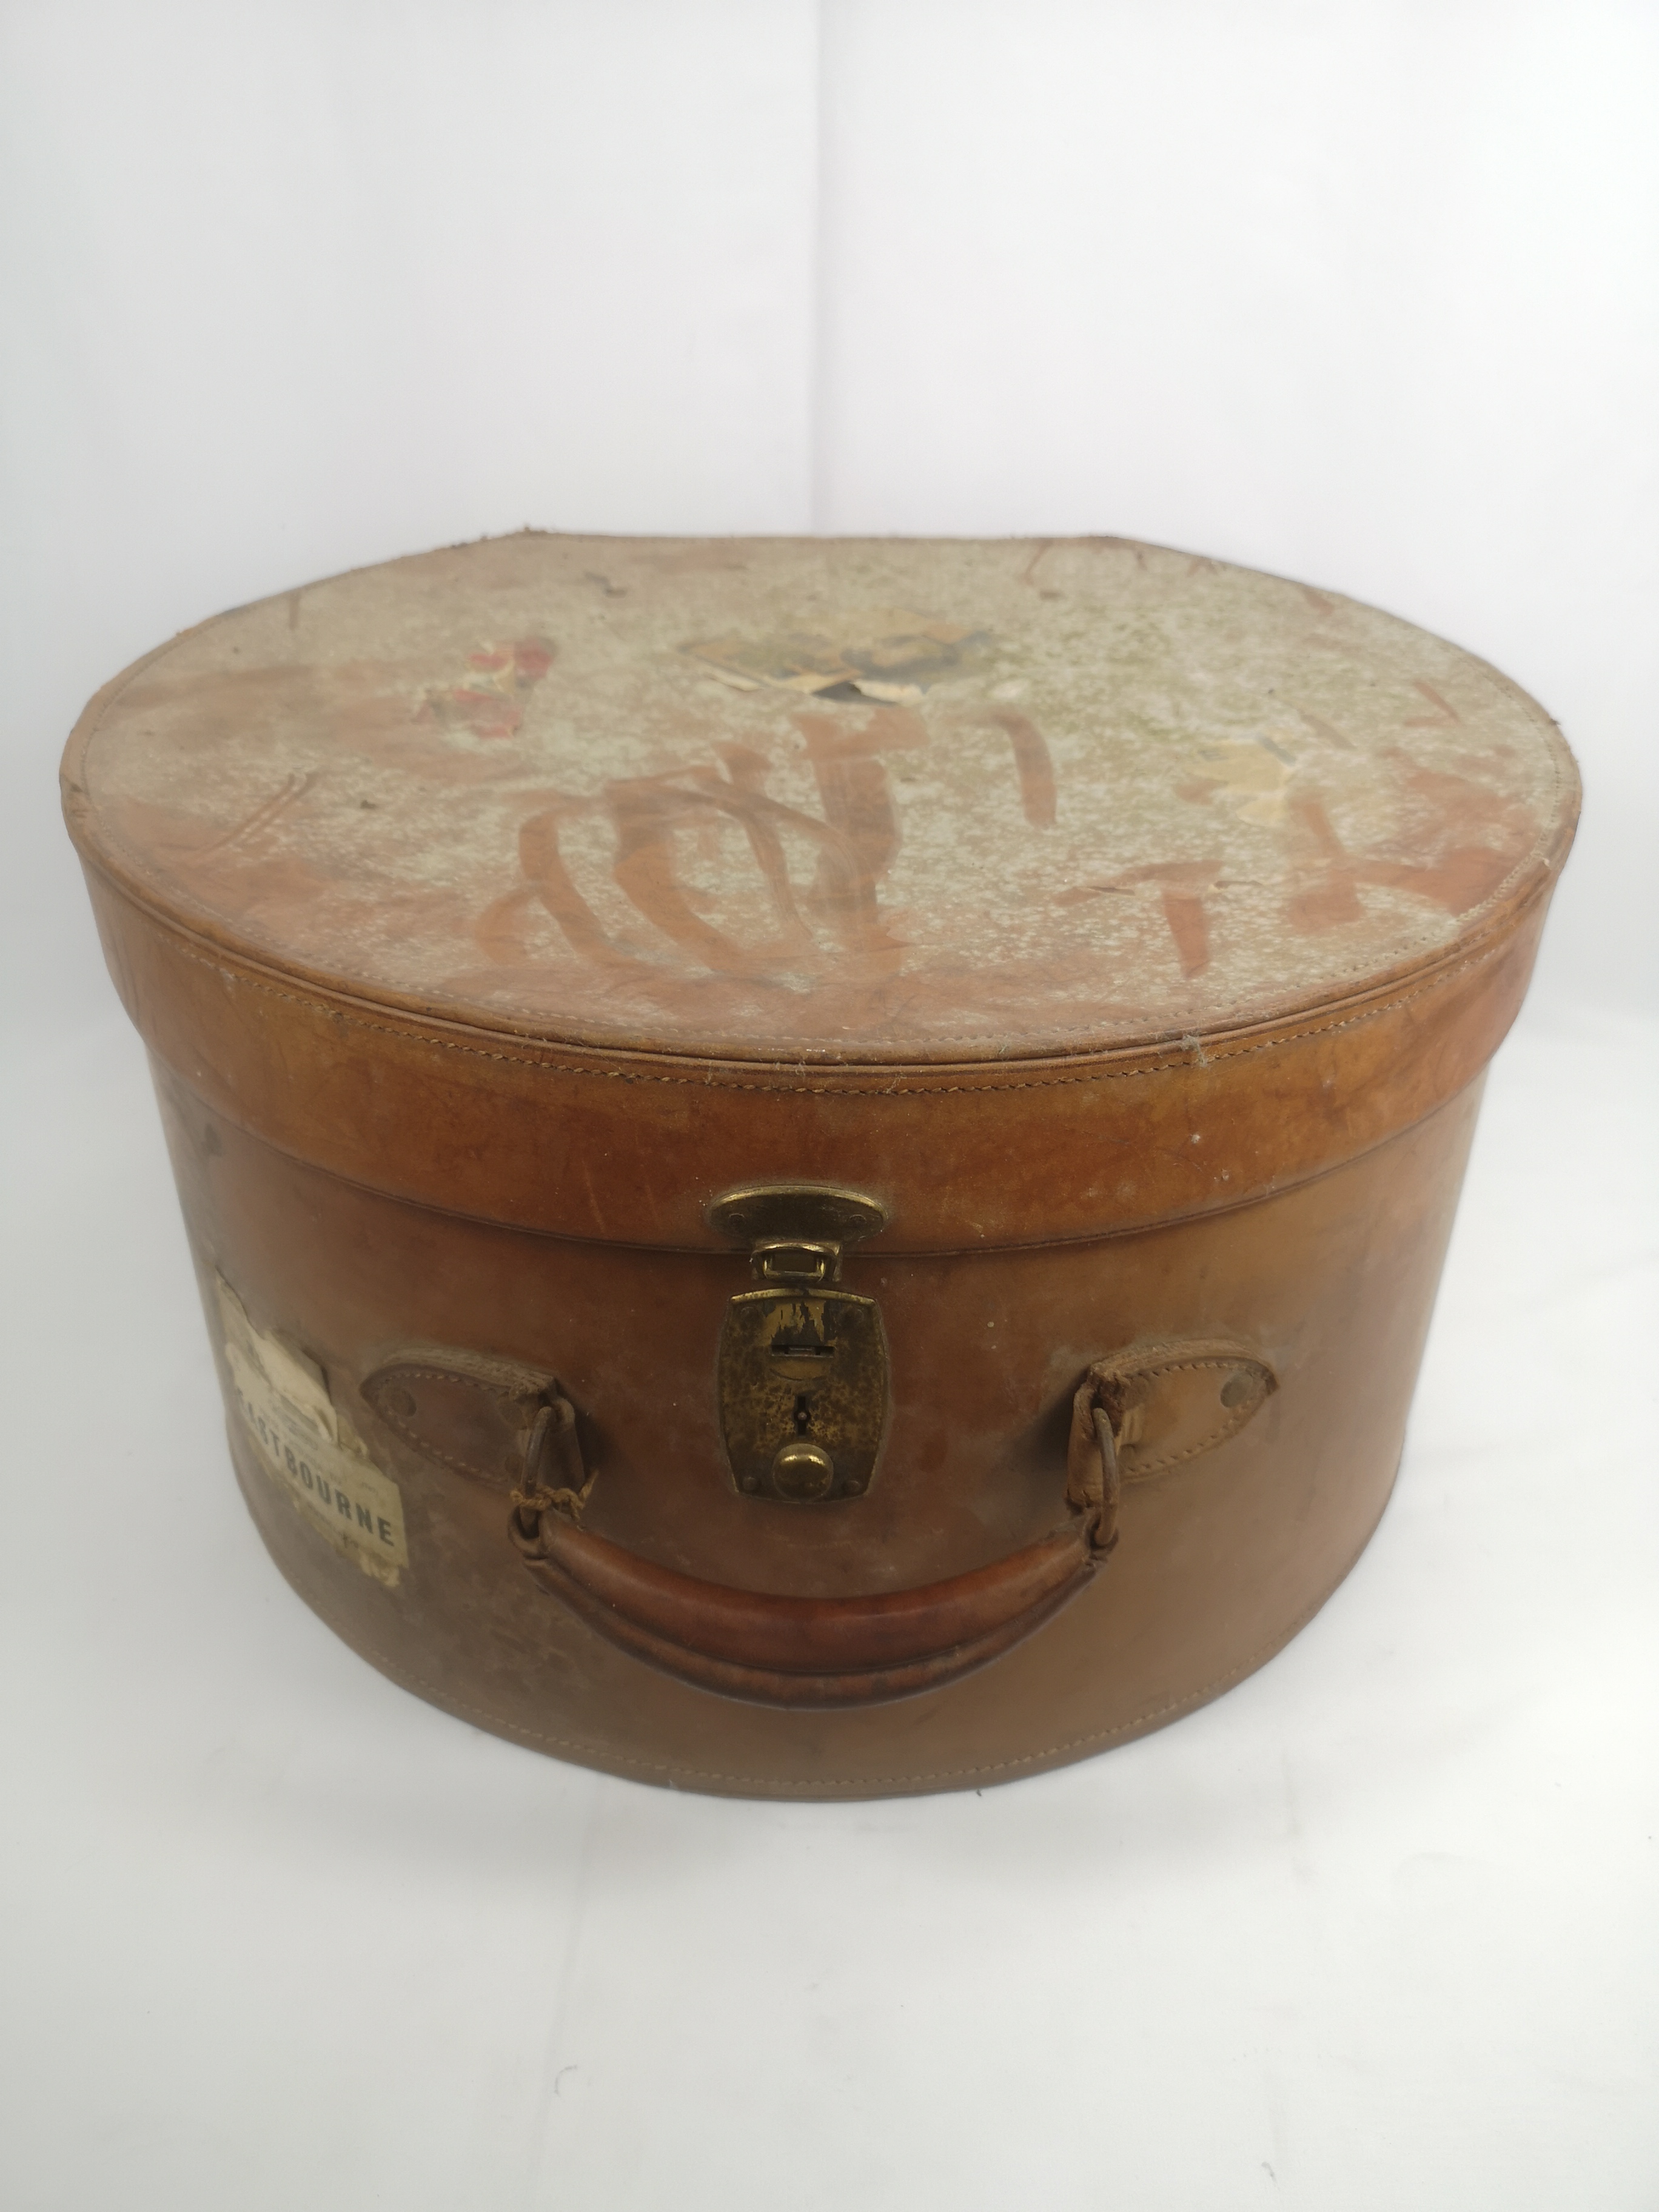 Lady's leather hat box